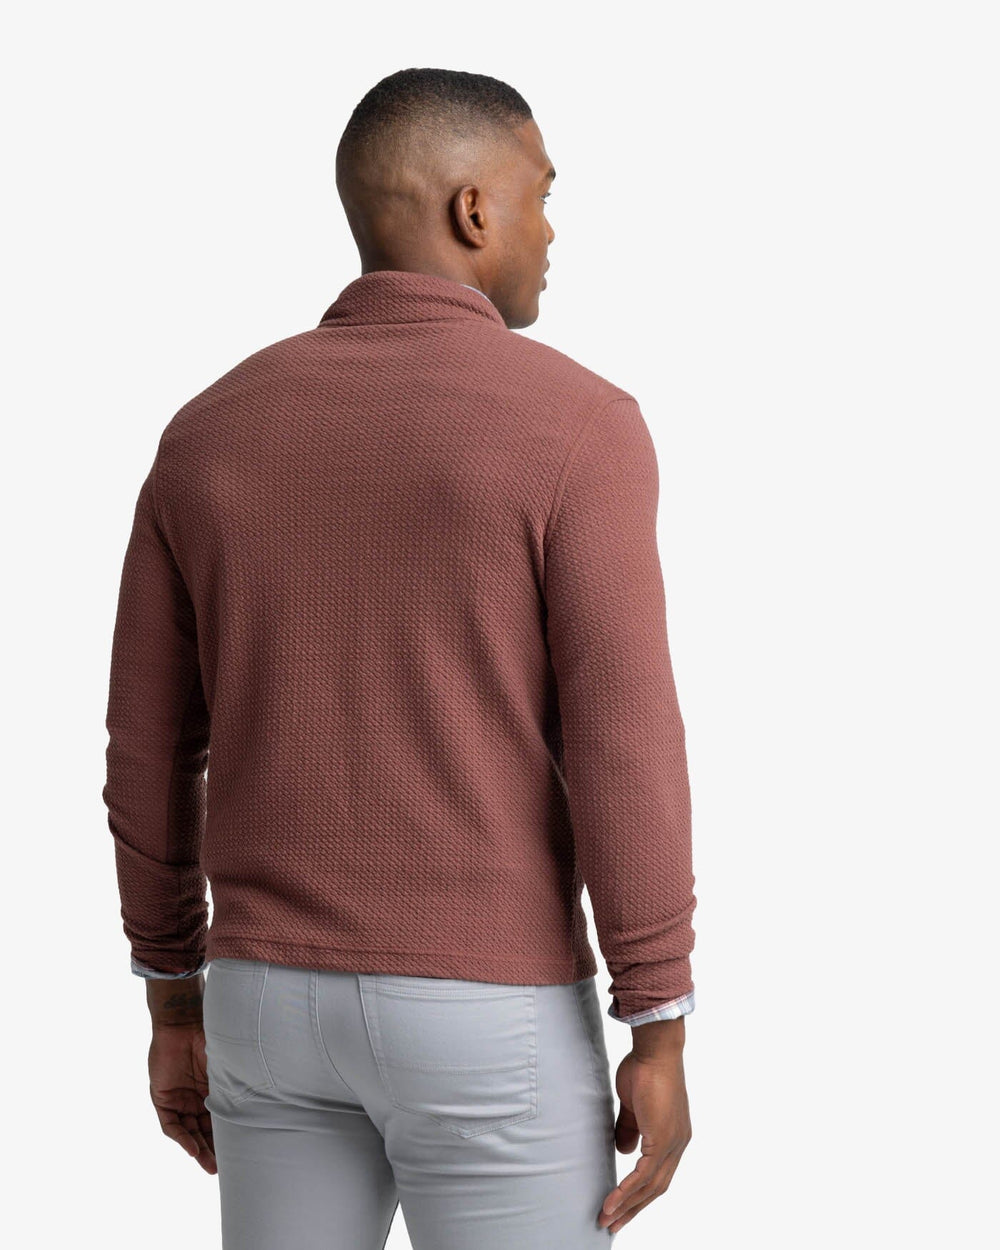 The back view of the Southern Tide Heather Outbound Quarter Zip by Southern Tide - Heather Bordeaux Red